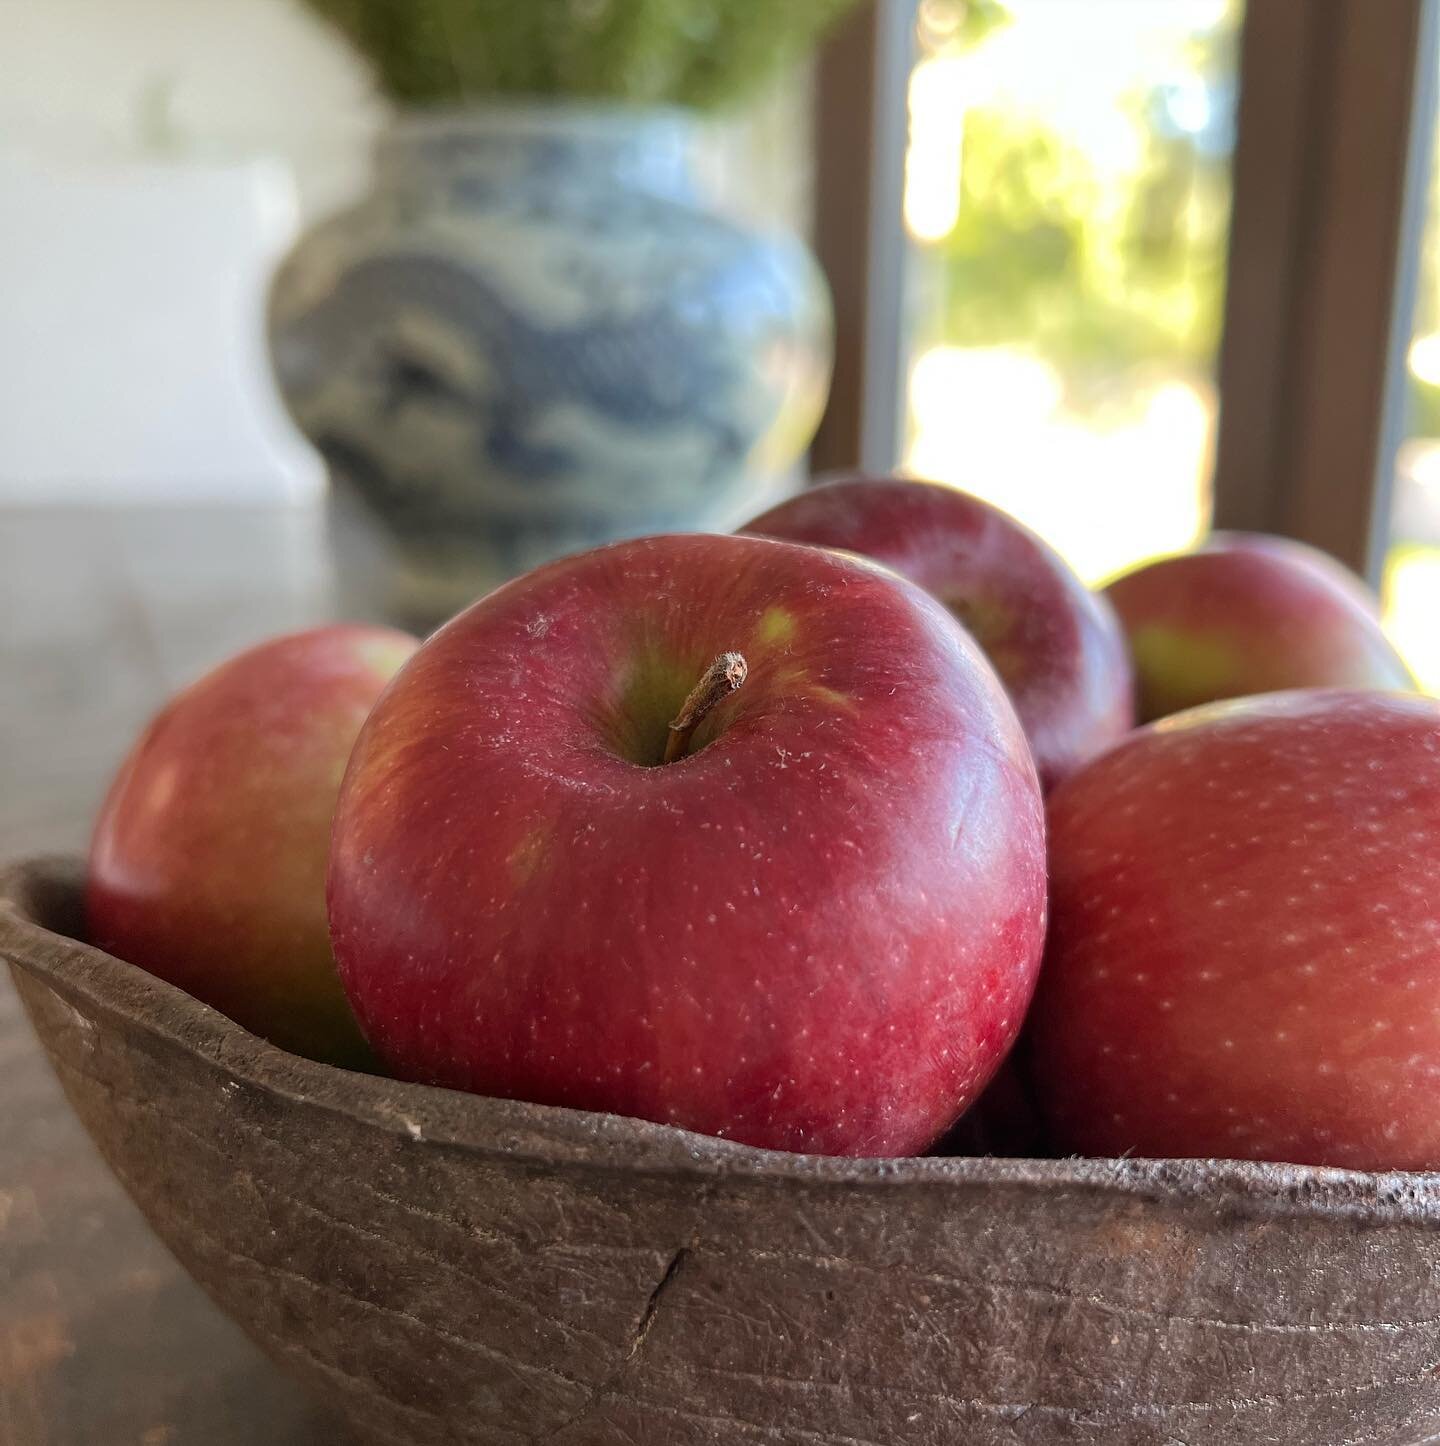 An apple a day&hellip;
Think about apples as medicine. Gently warmed with ghee, cinnamon, clove and nutmeg. Delicious!
 

#vatamedicine #vataseason #ayurveda#localapples